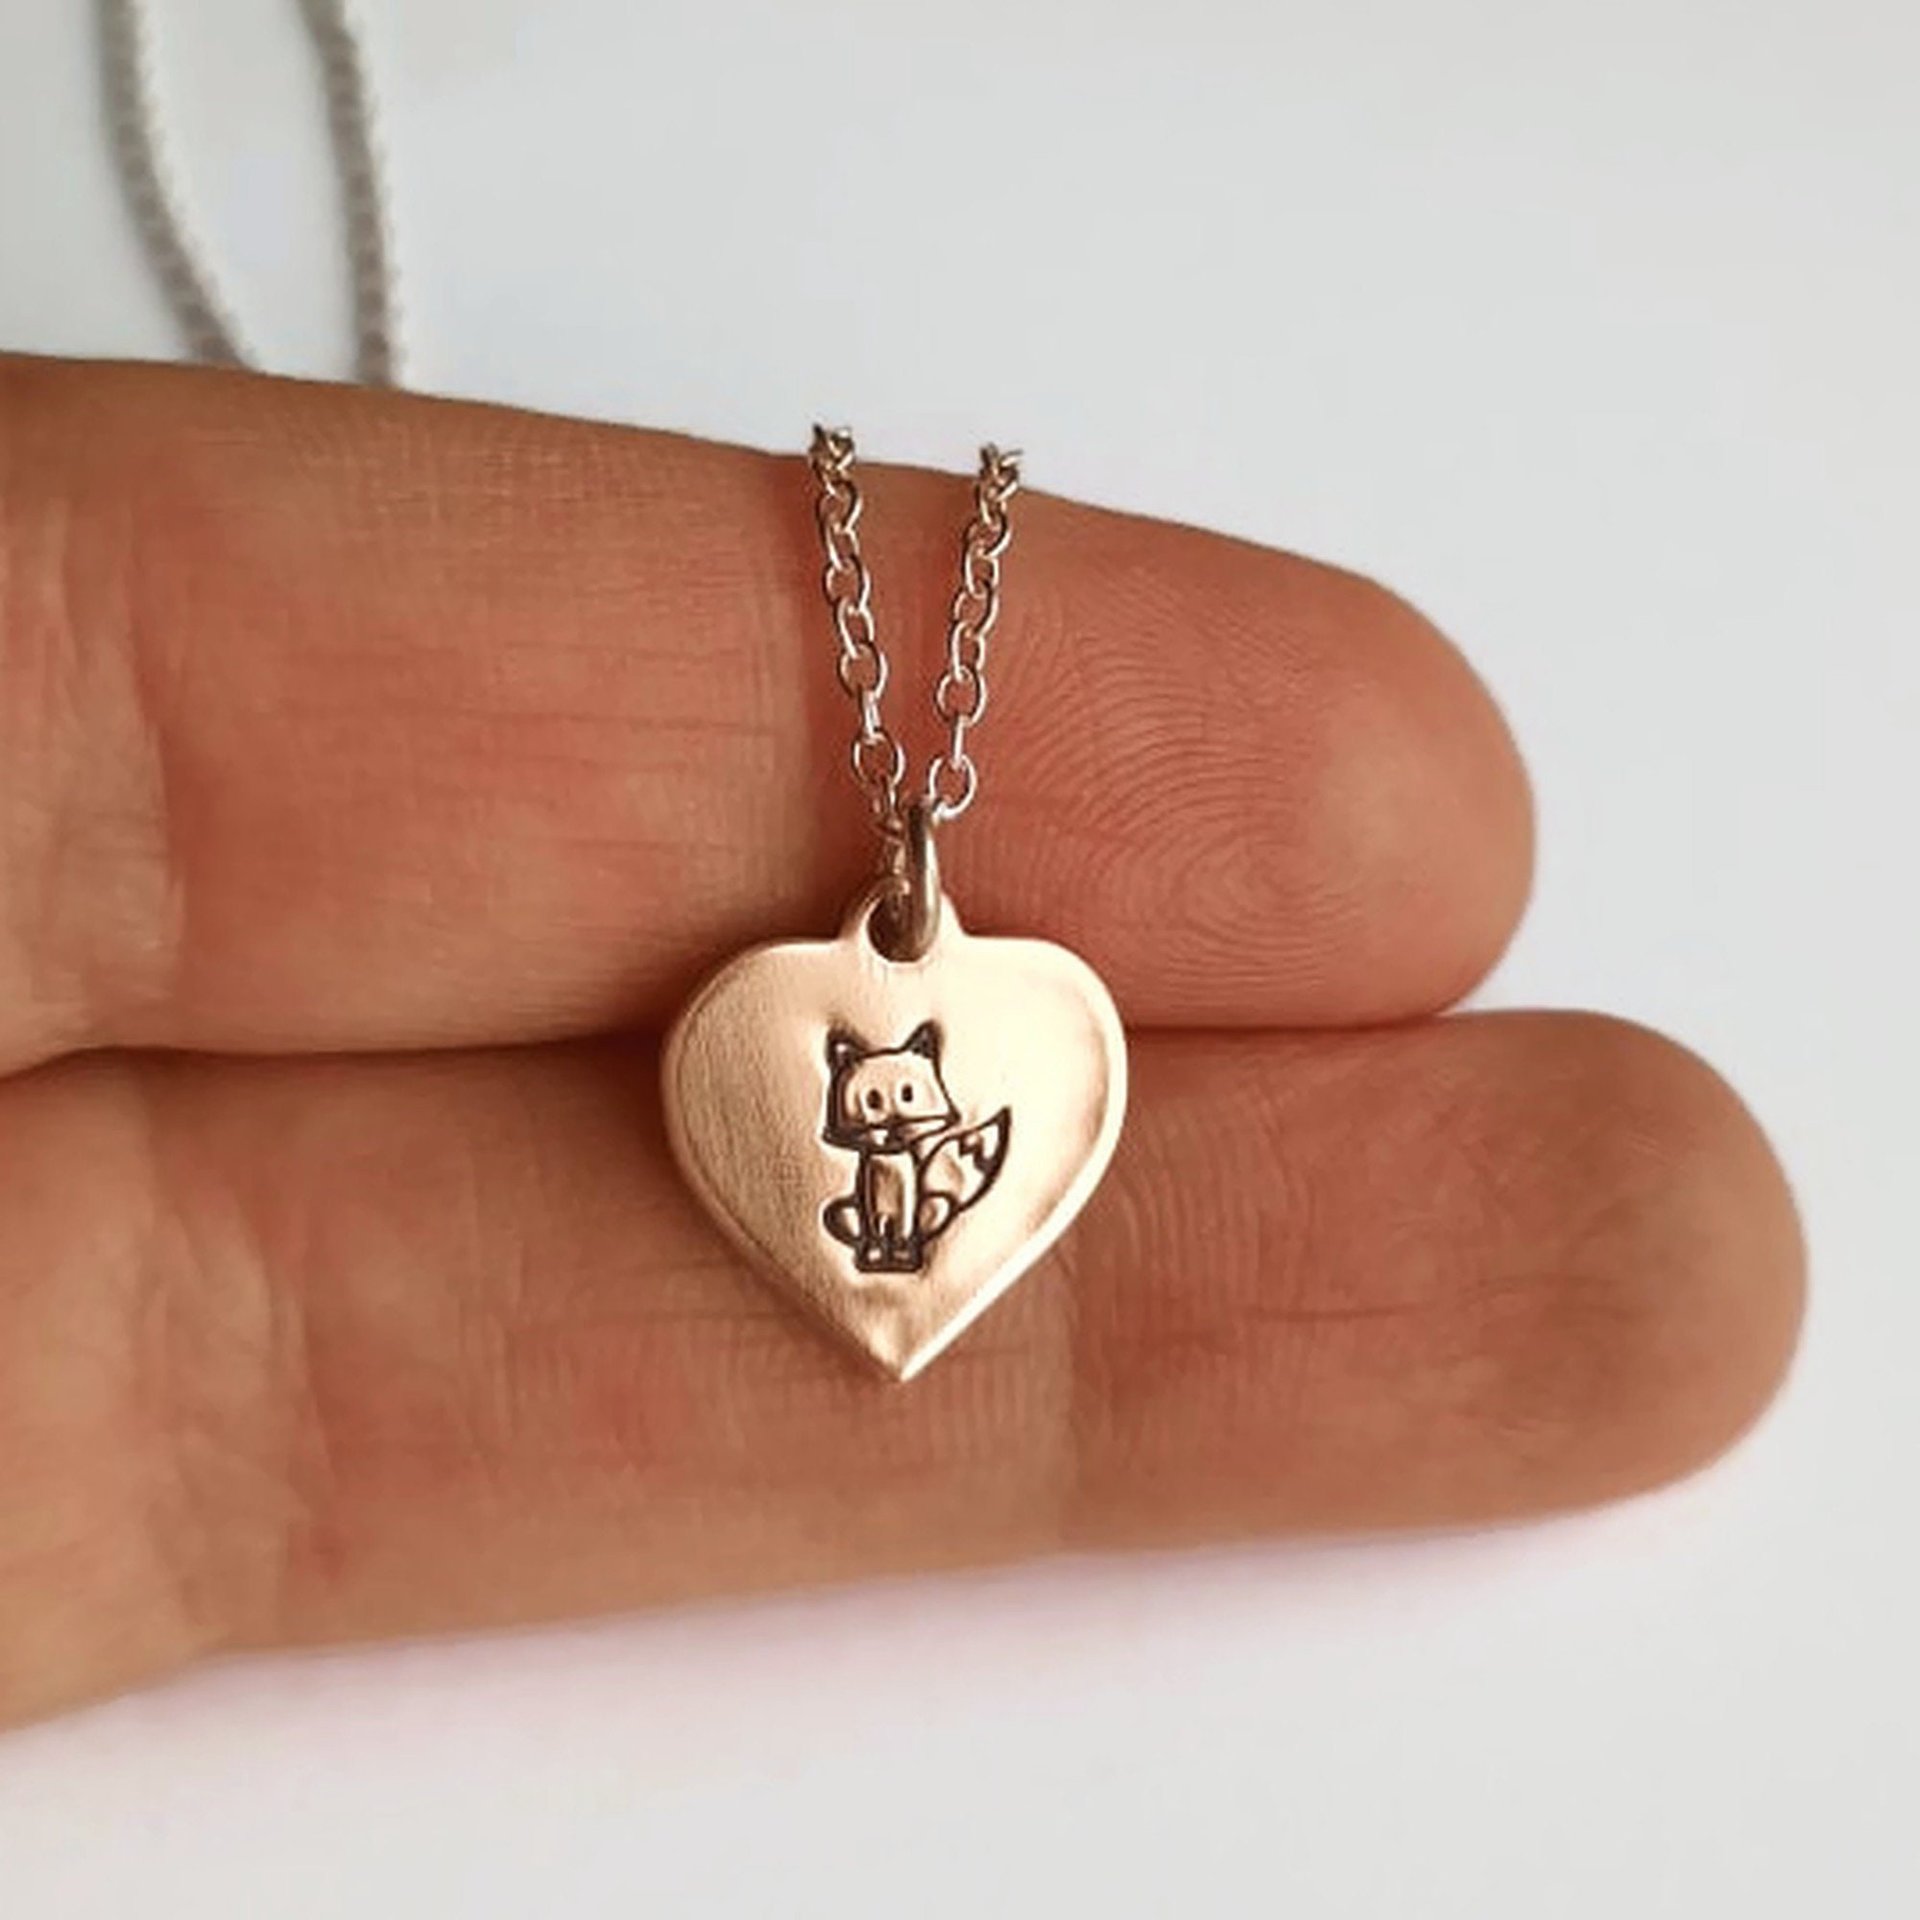 Hand Stamped Copper Fox Necklace ~ Handmade by The Tiny Tree Frog Jewellery